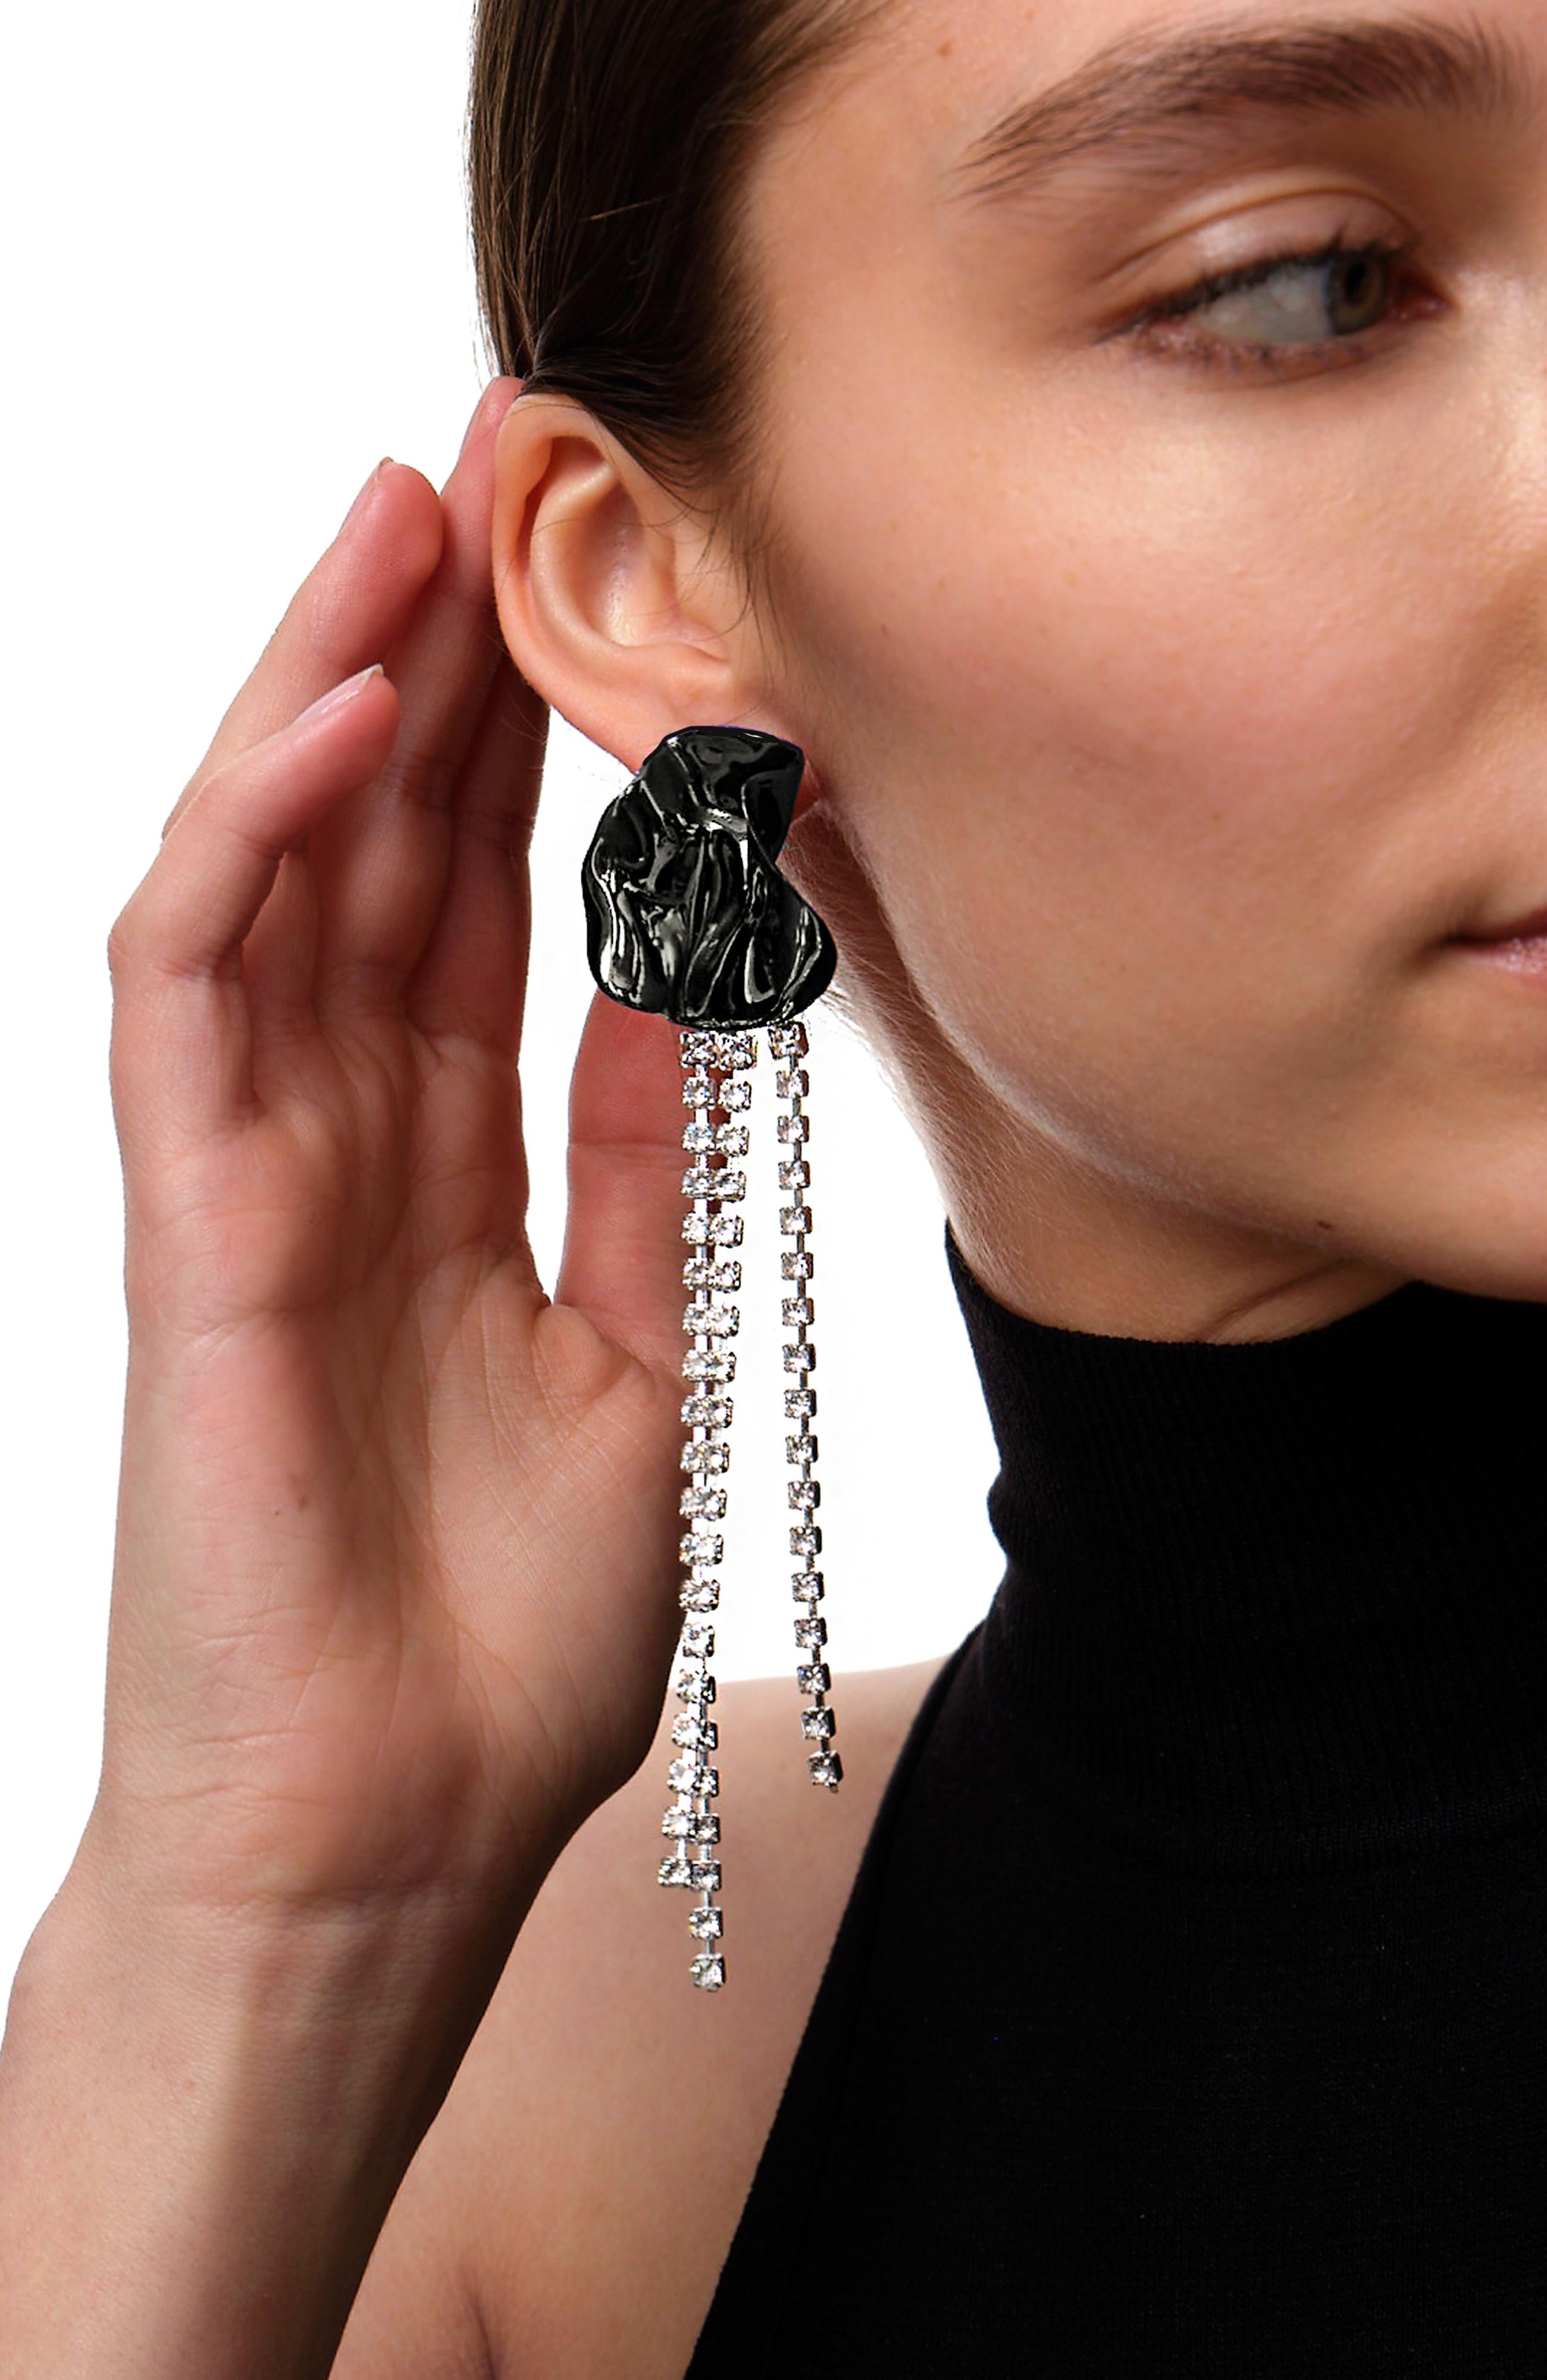 The Georgia crystal-embellished earrings from Sterling King feature a sculptural shape embellished with cascading clear crystals. Inspired by the works of Georgia O'Keeffe, these floral-inspired earrings are finished with metallic black ceramic